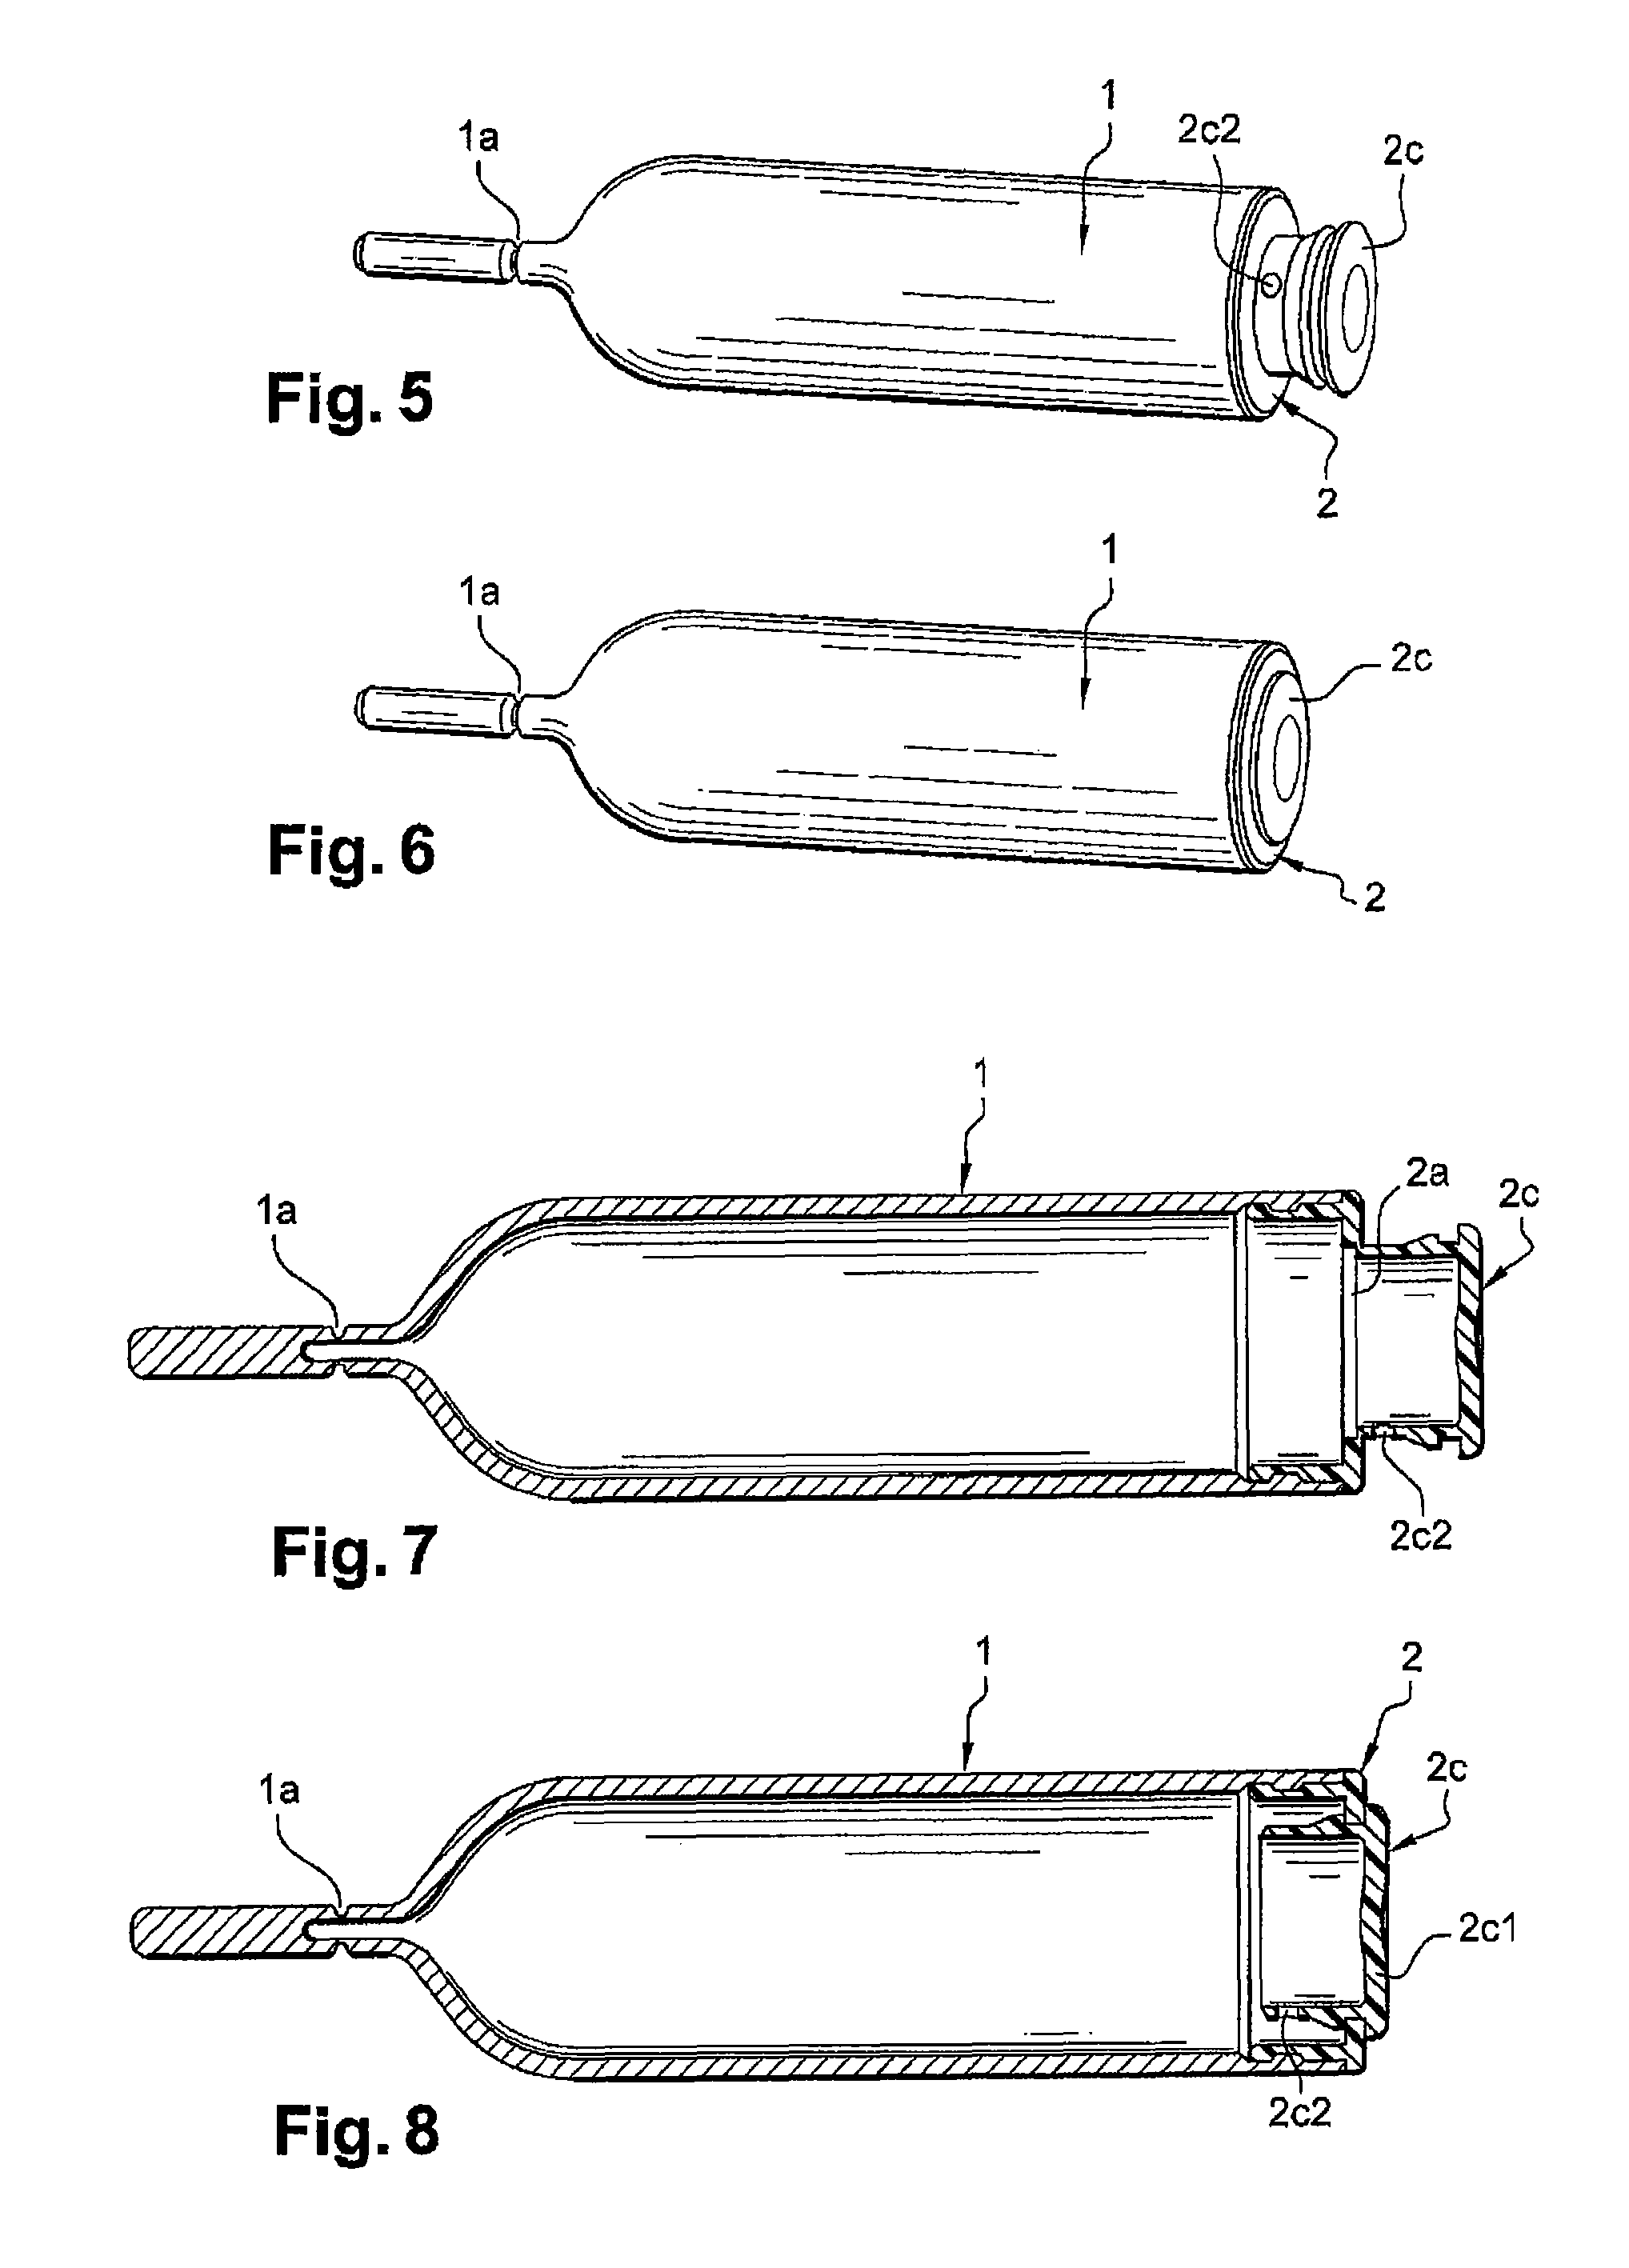 Vial for receiving a predefined dose of a liquid